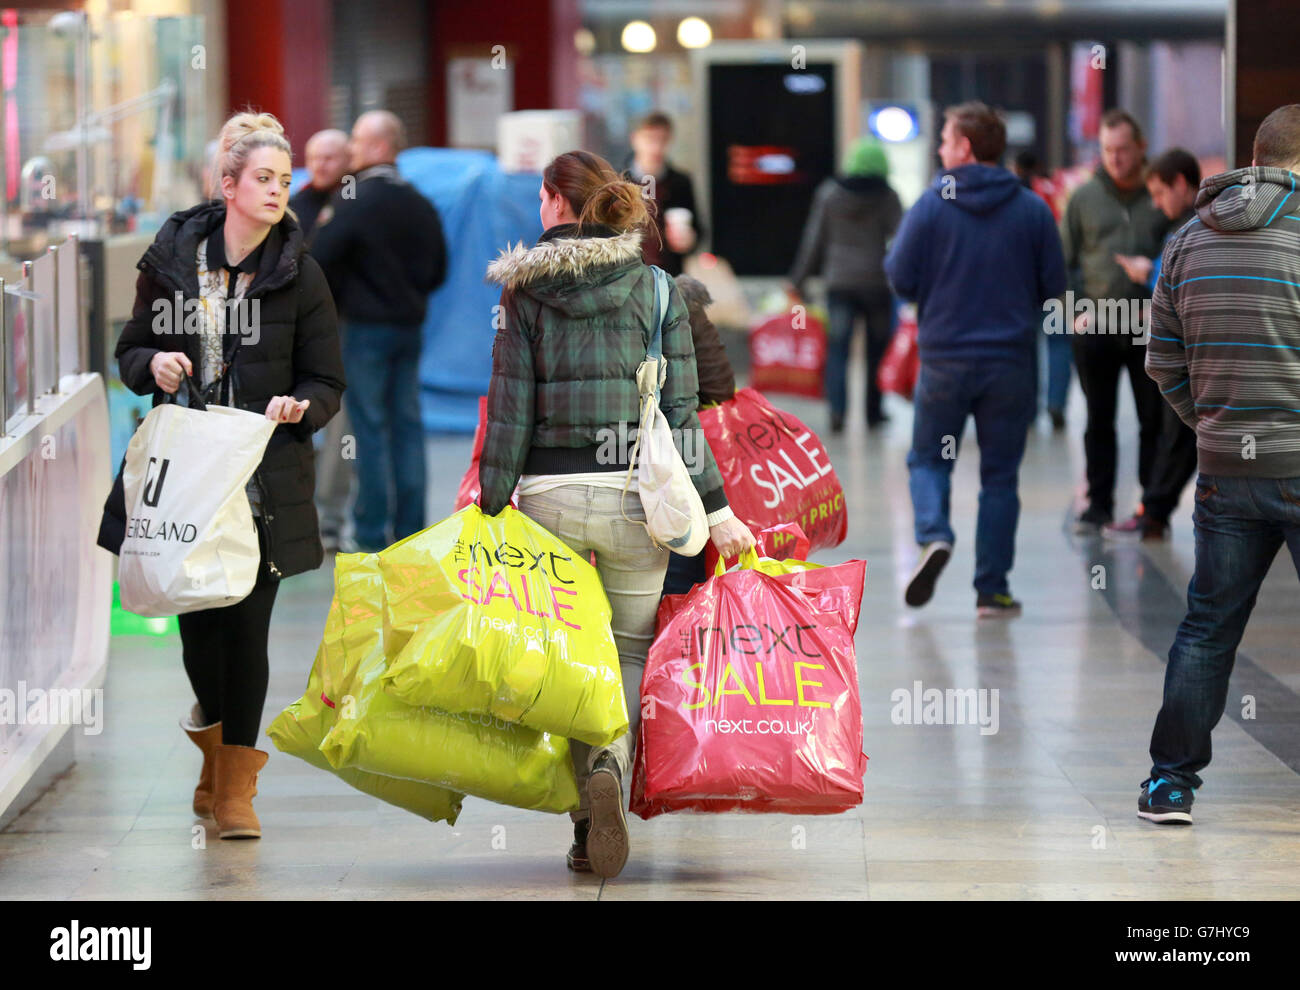 Boxing Day sales. EDITORIAL USE ONLY Shoppers at the WestQuay shopping centre in Southampton, during the Boxing Day sales. Stock Photo